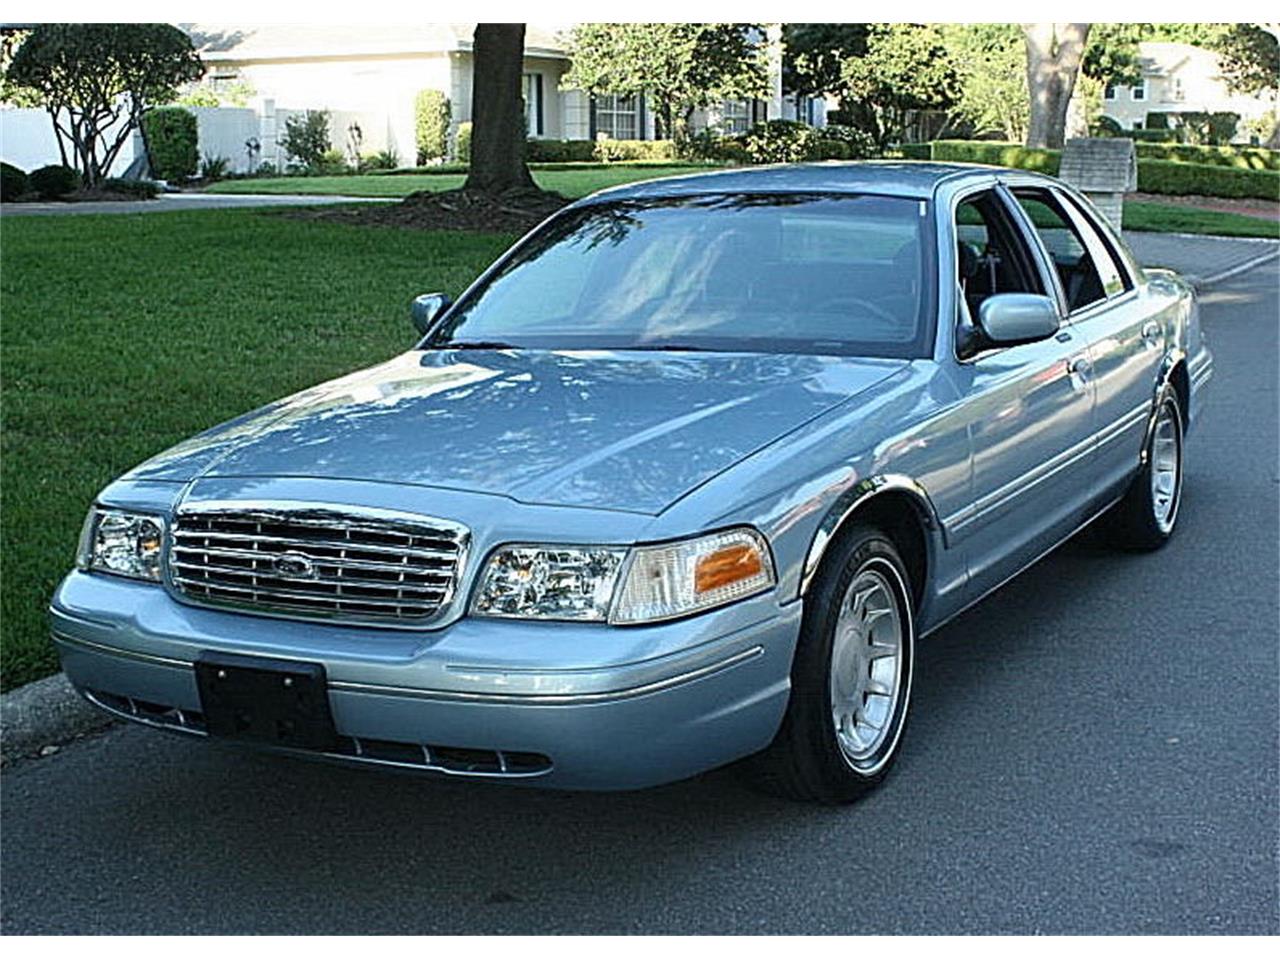 2000 Ford Crown Victoria for Sale ClassicCars com CC 1087628